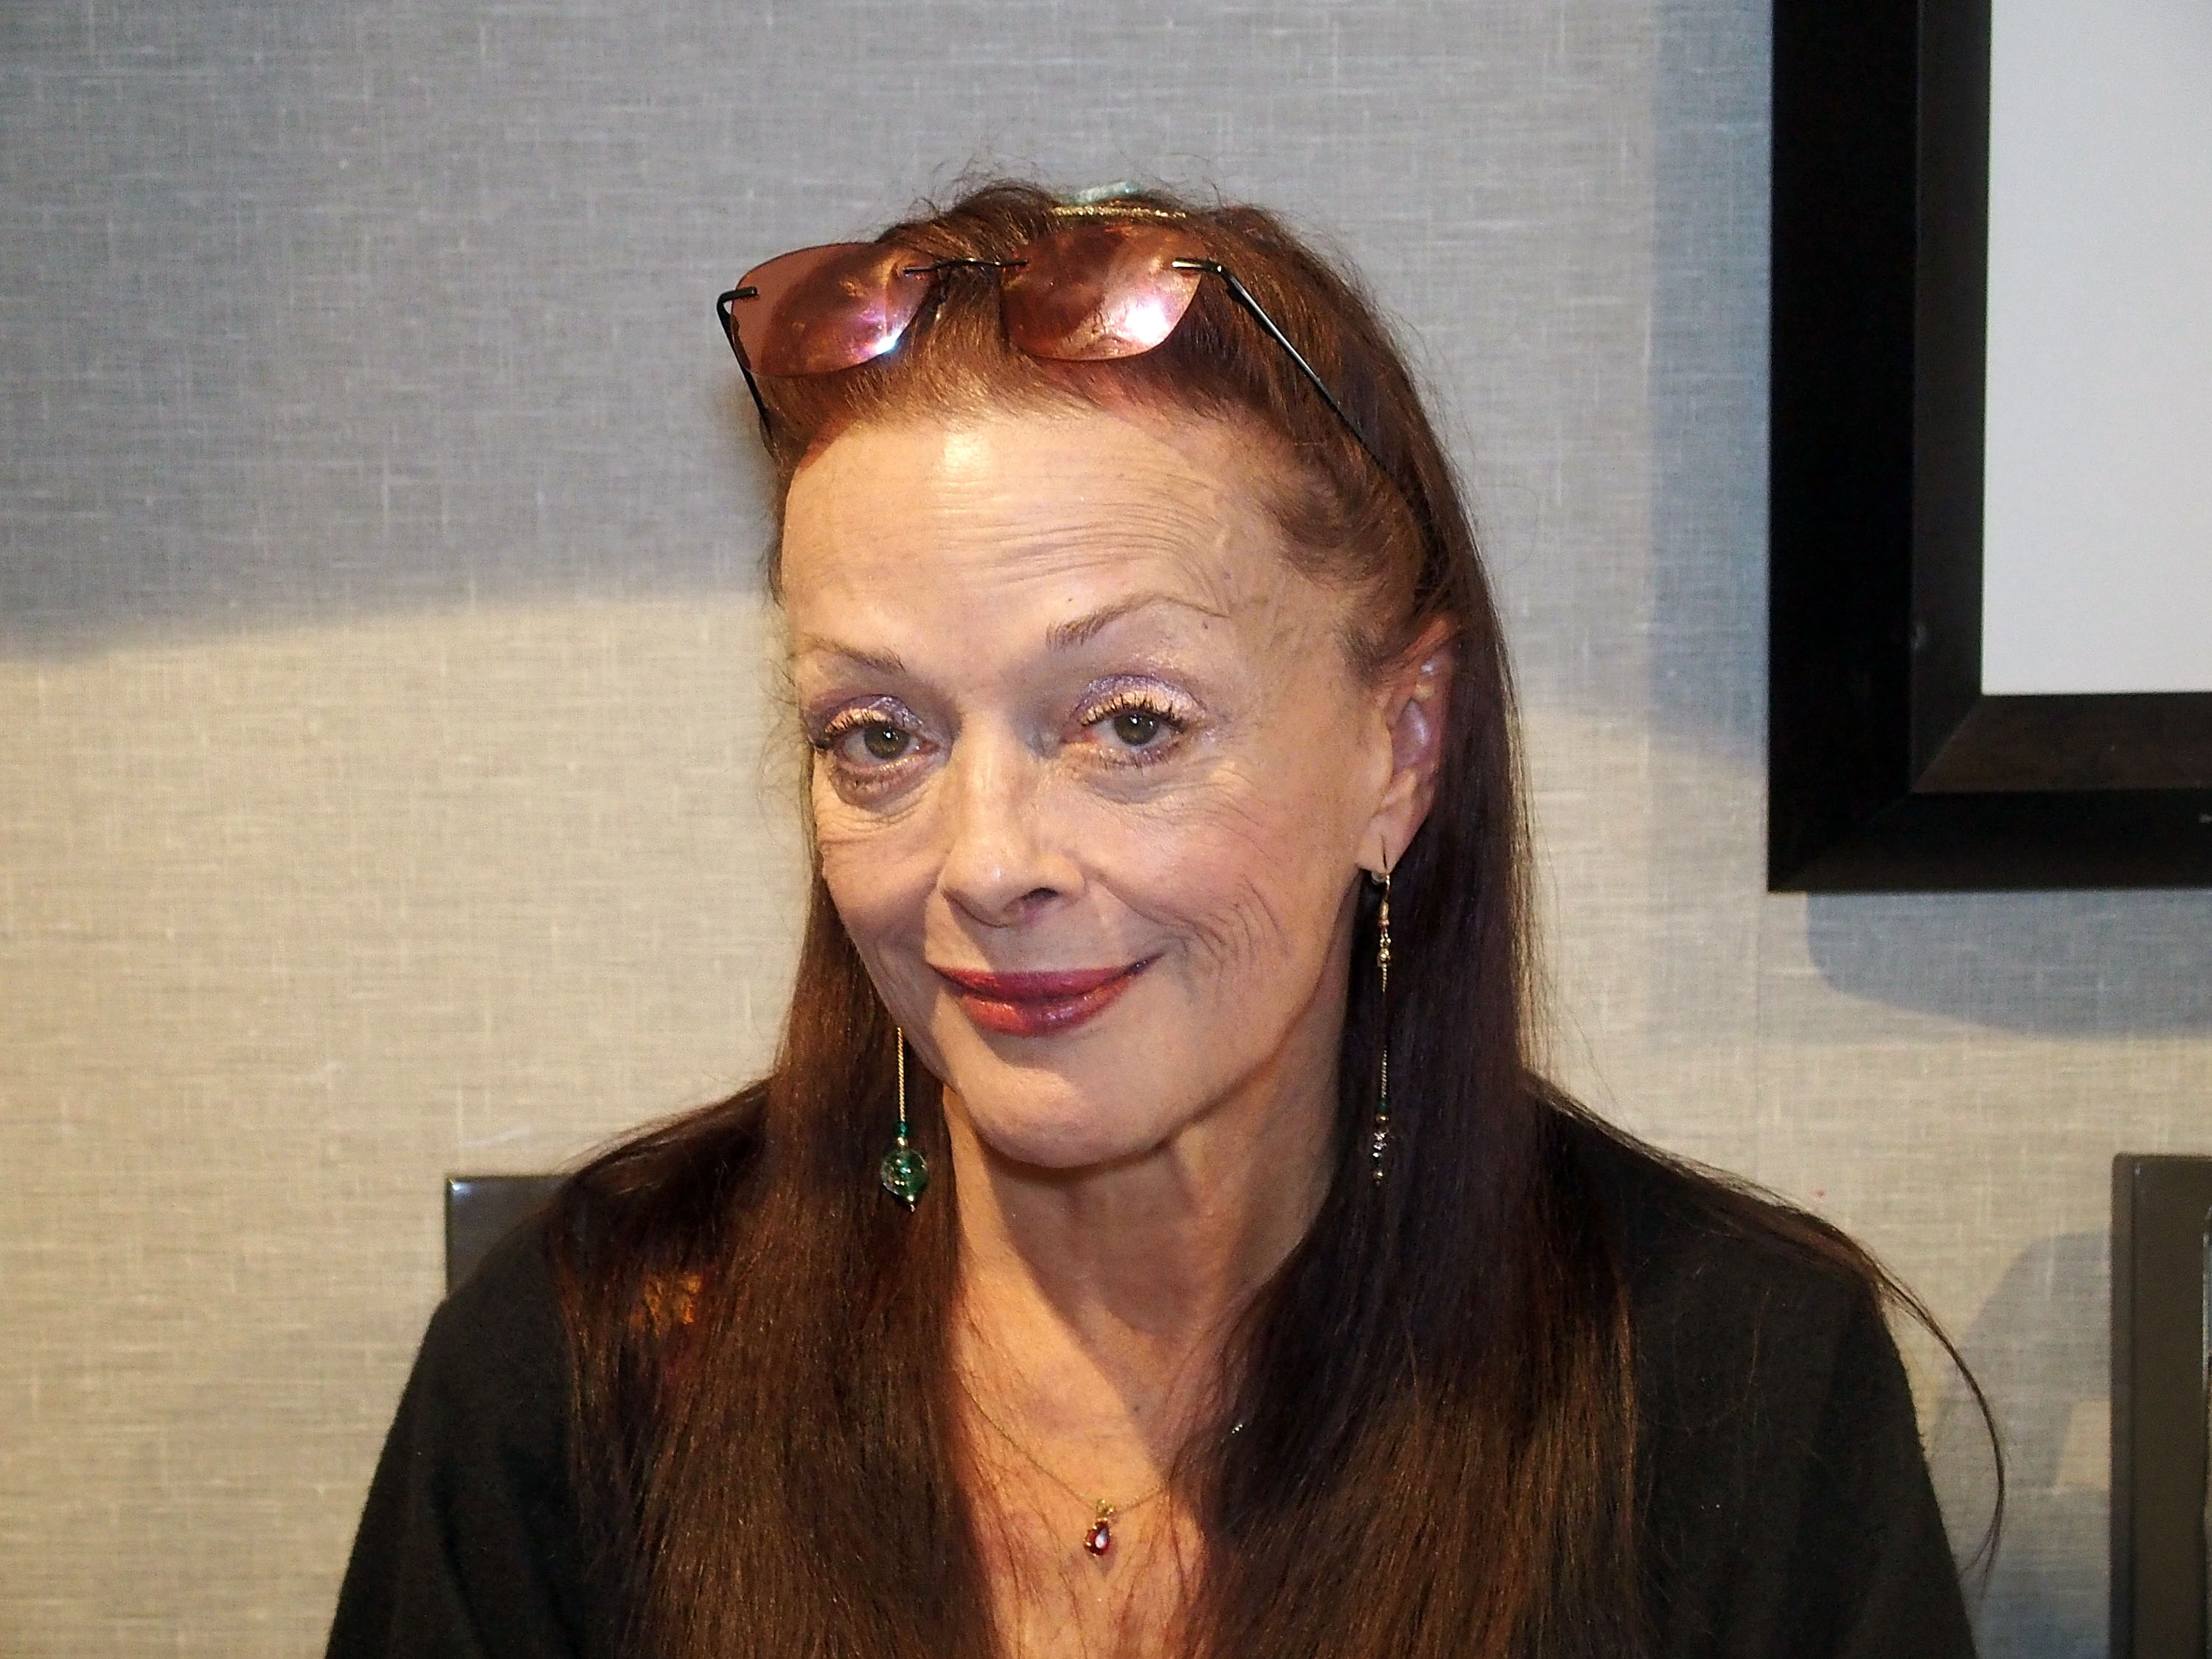 'The Addams Family' and 'As the World Turns' star Lisa Loring smiling for a photo during a convention.